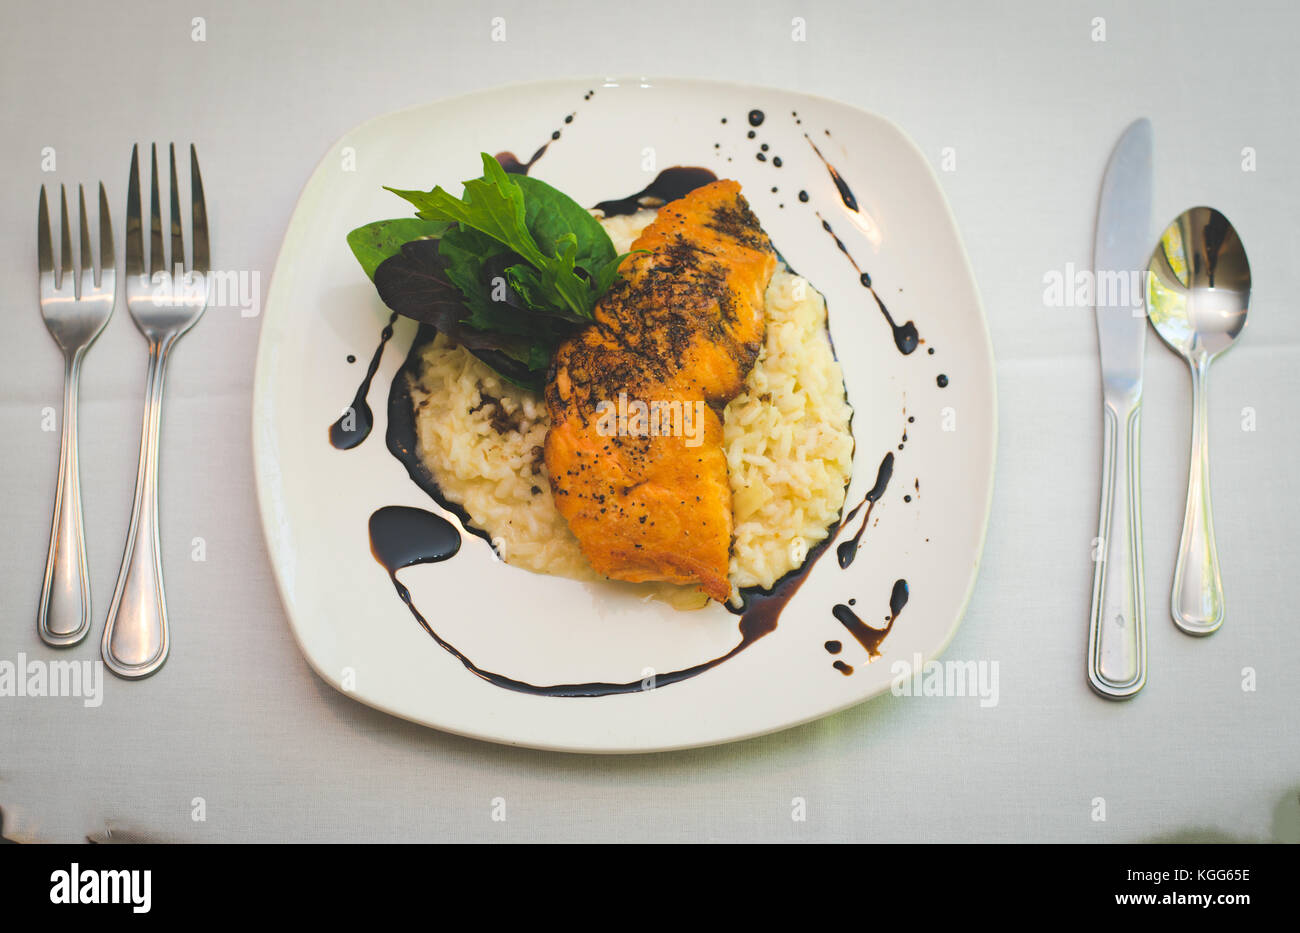 A salmon and rice dish presented plated at a restaurant. Stock Photo